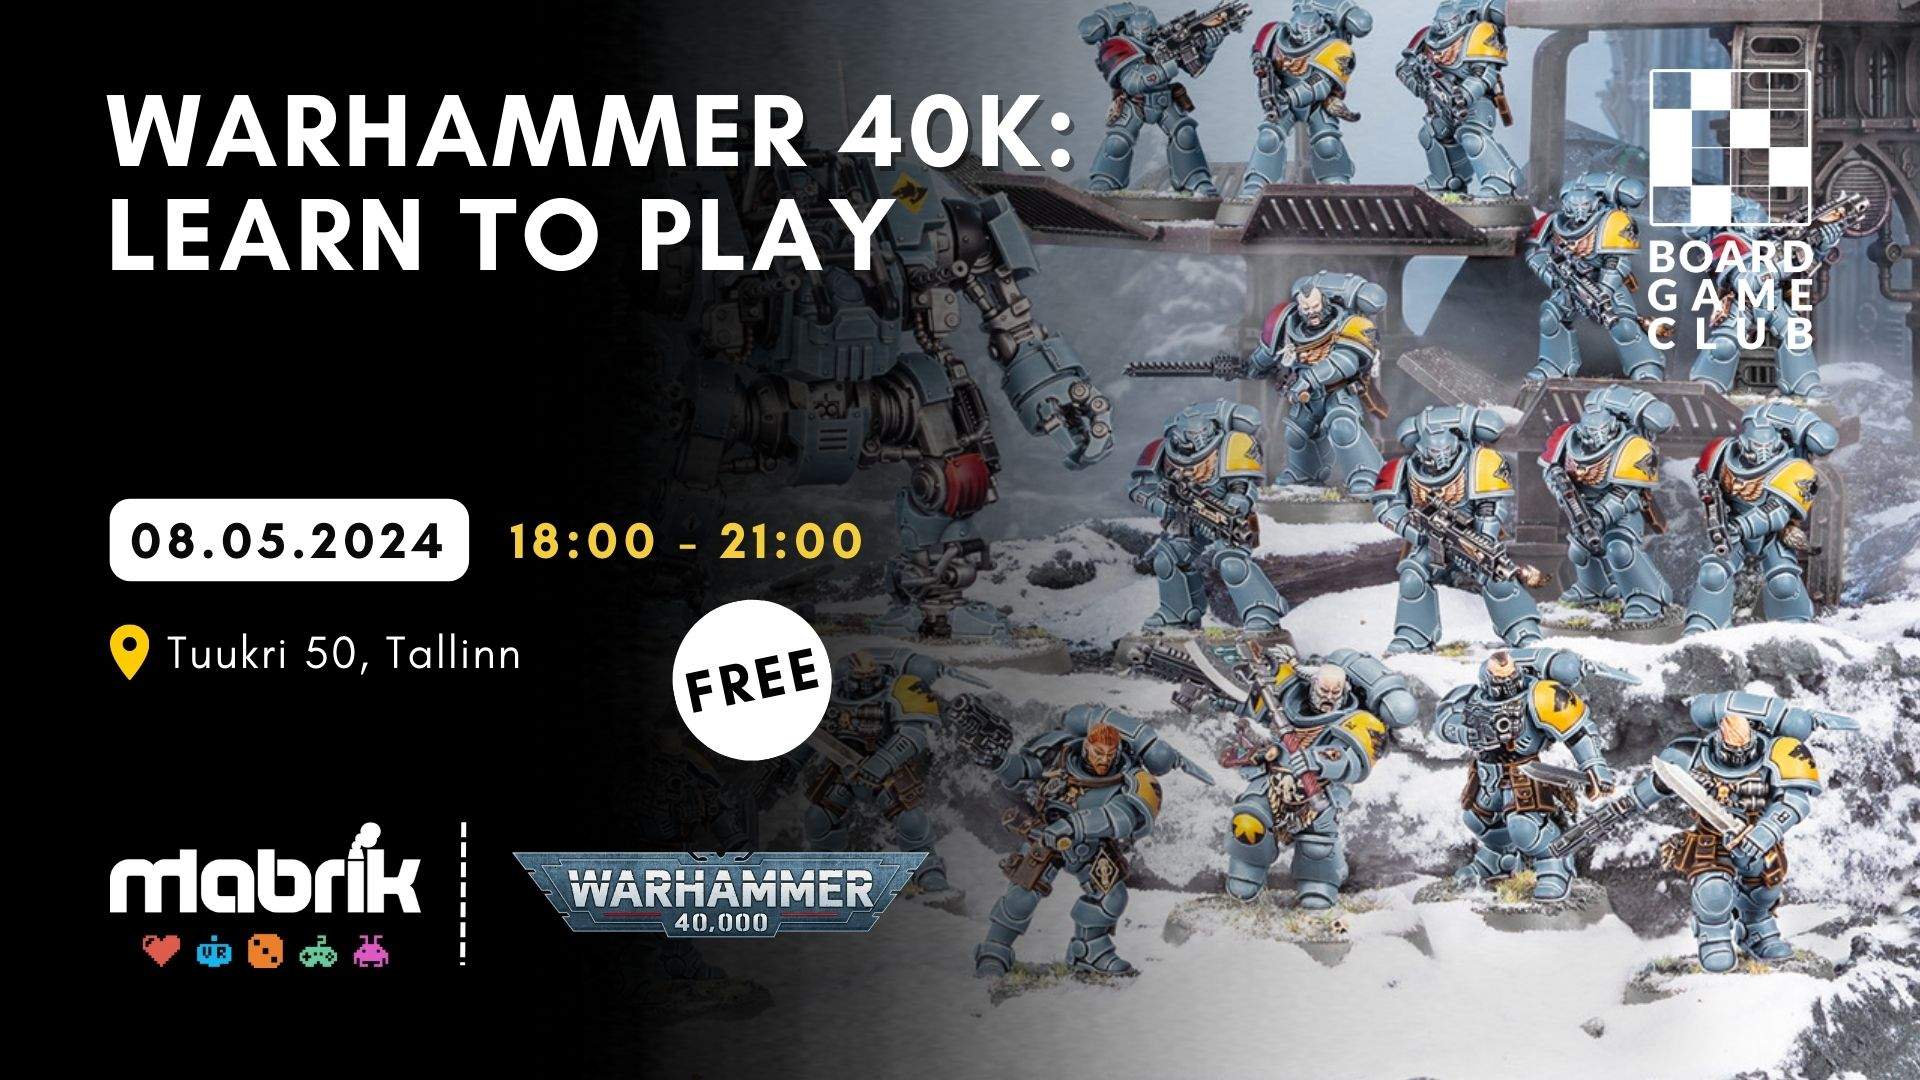 Events - 01.05.2024 - Warhammer 40k - Learn To Play